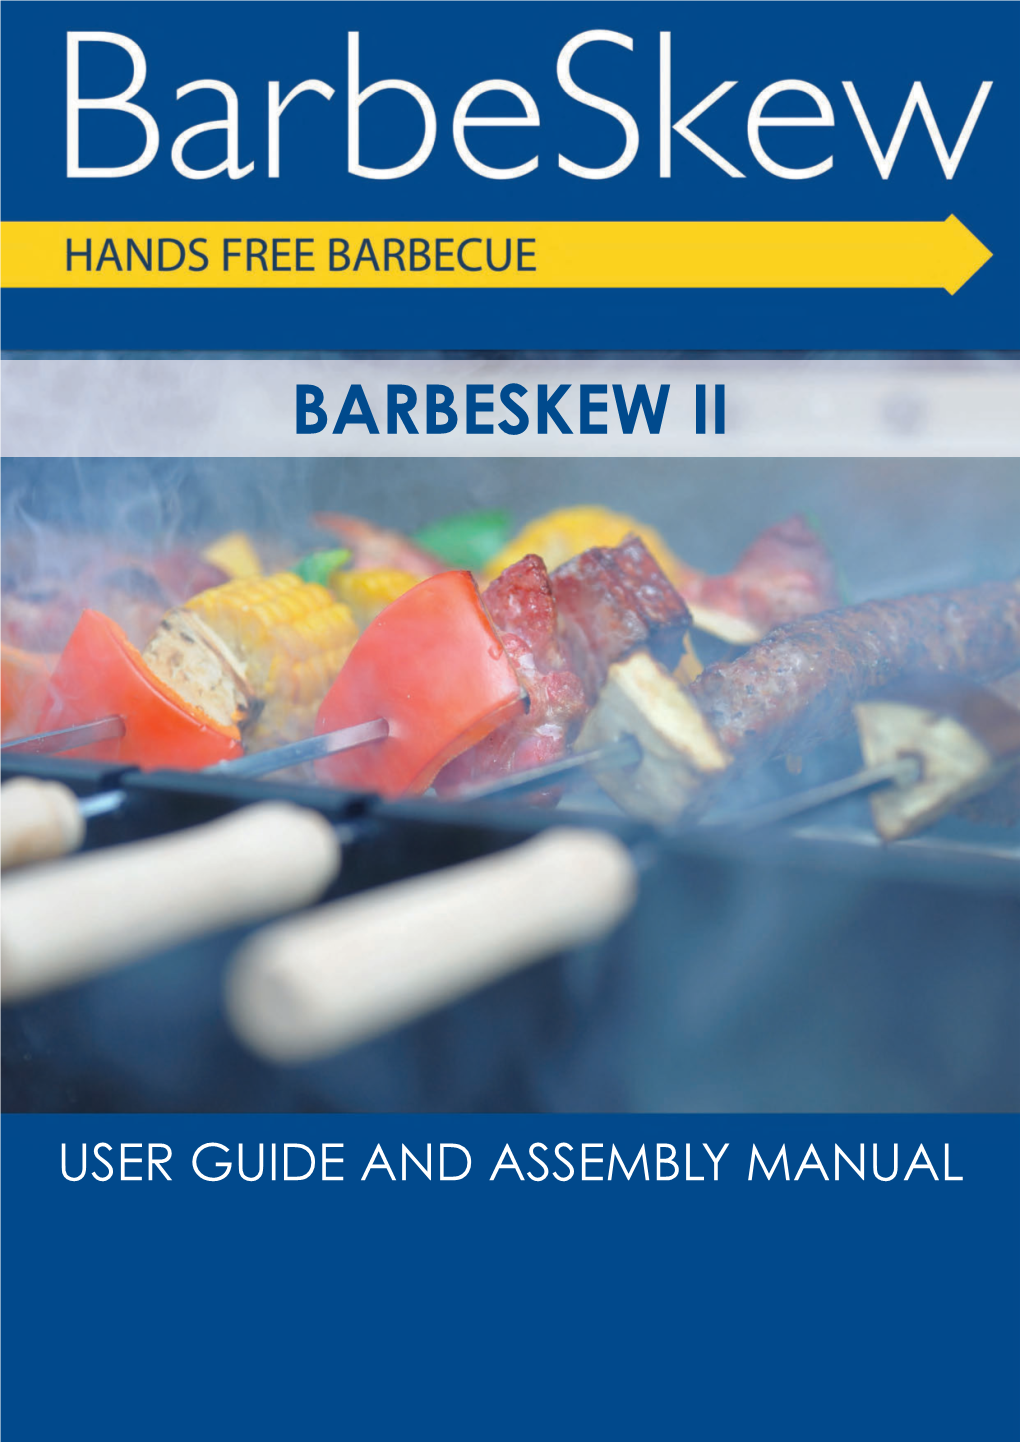 Barbeskew II Assembly and User Guide